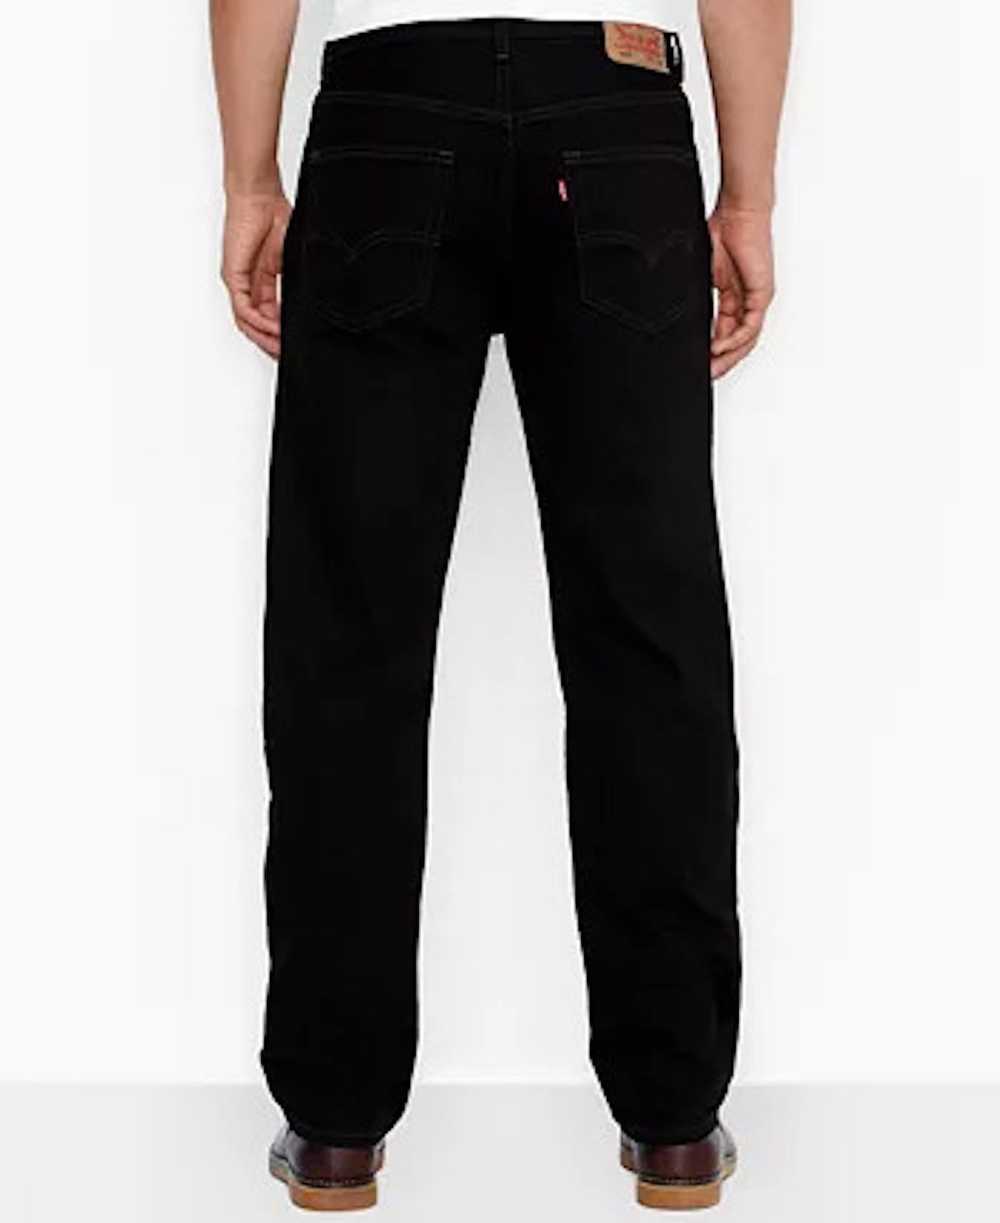 Levi's 550 Relaxed Fit Jeans - image 7